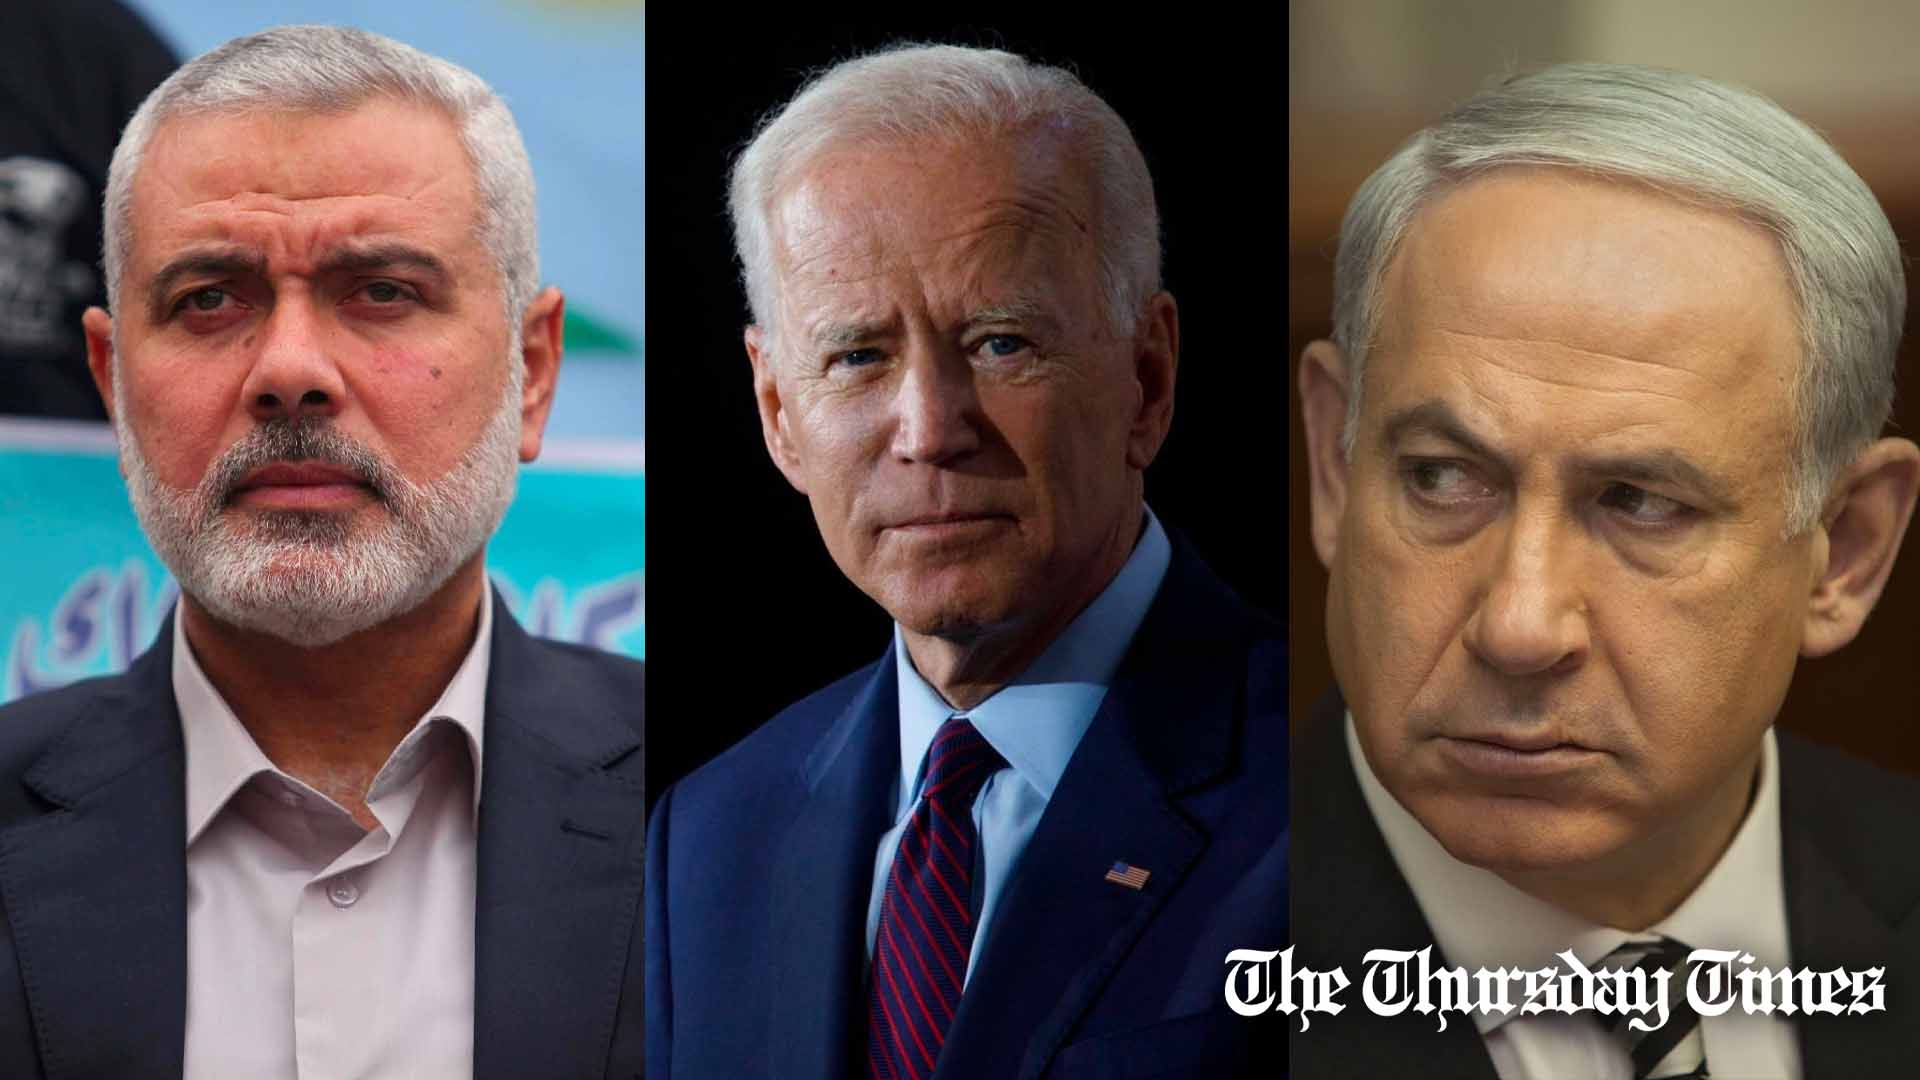 A combined file photo is shown of Hamas chief Ismail Haniyeh (L), U.S. president Joe Biden (C) and Israeli prime minister Benjamin Netanyahu (R). — FILE/THE THURSDAY TIMES